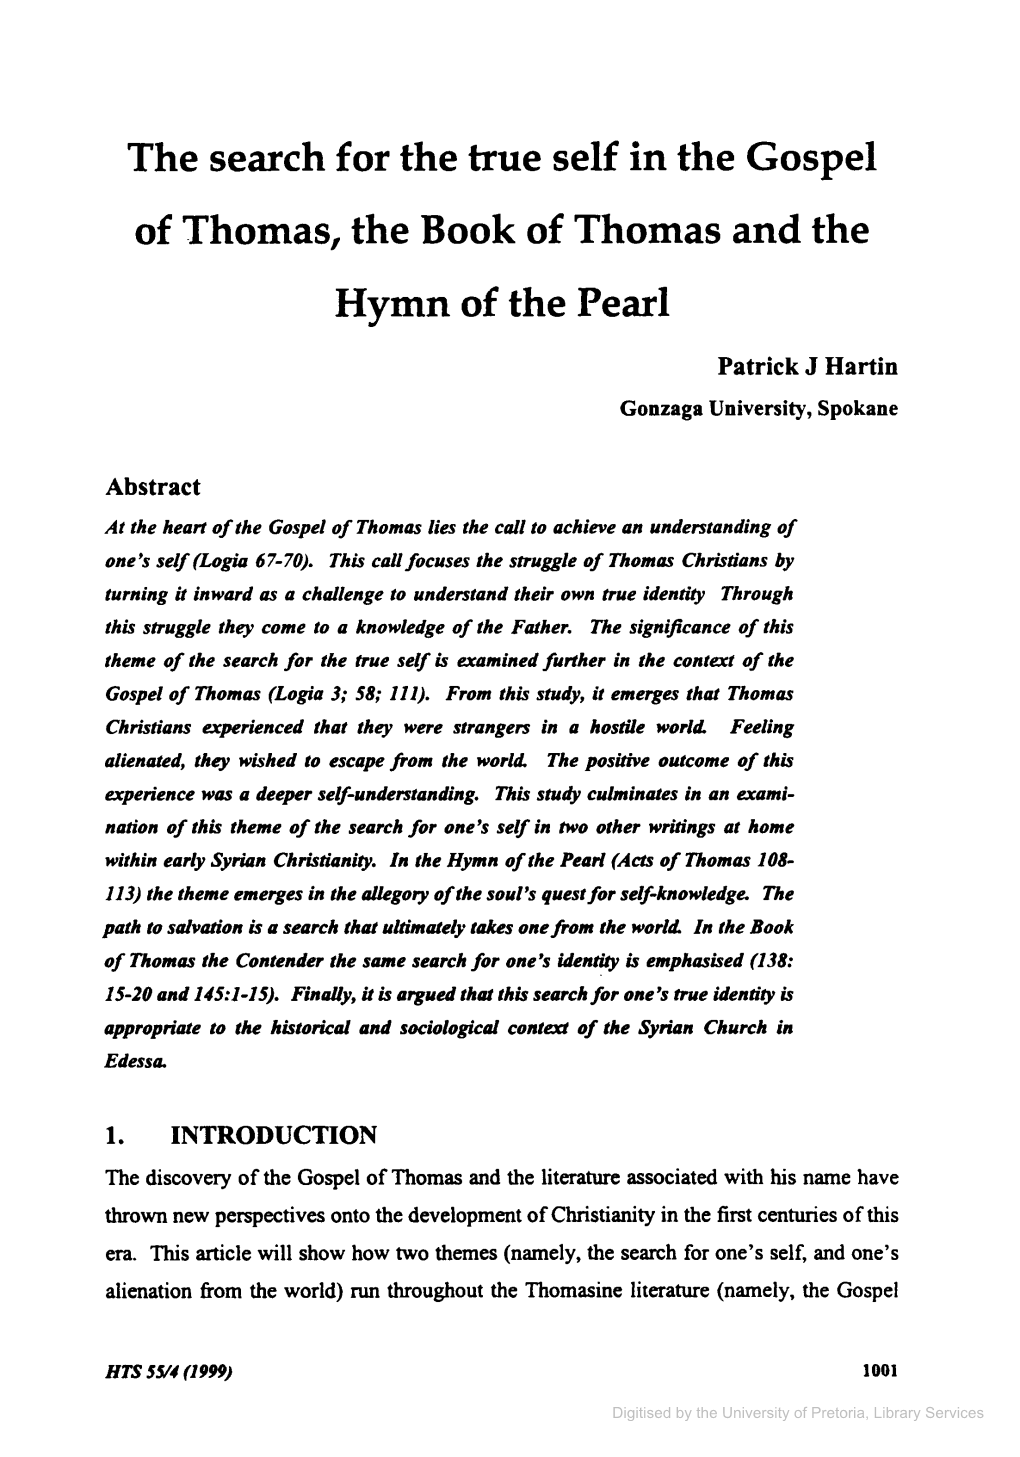 The Search for the True Self in the Gospel of Thomas, the Book of Thomas and the Hymn of the Pearl